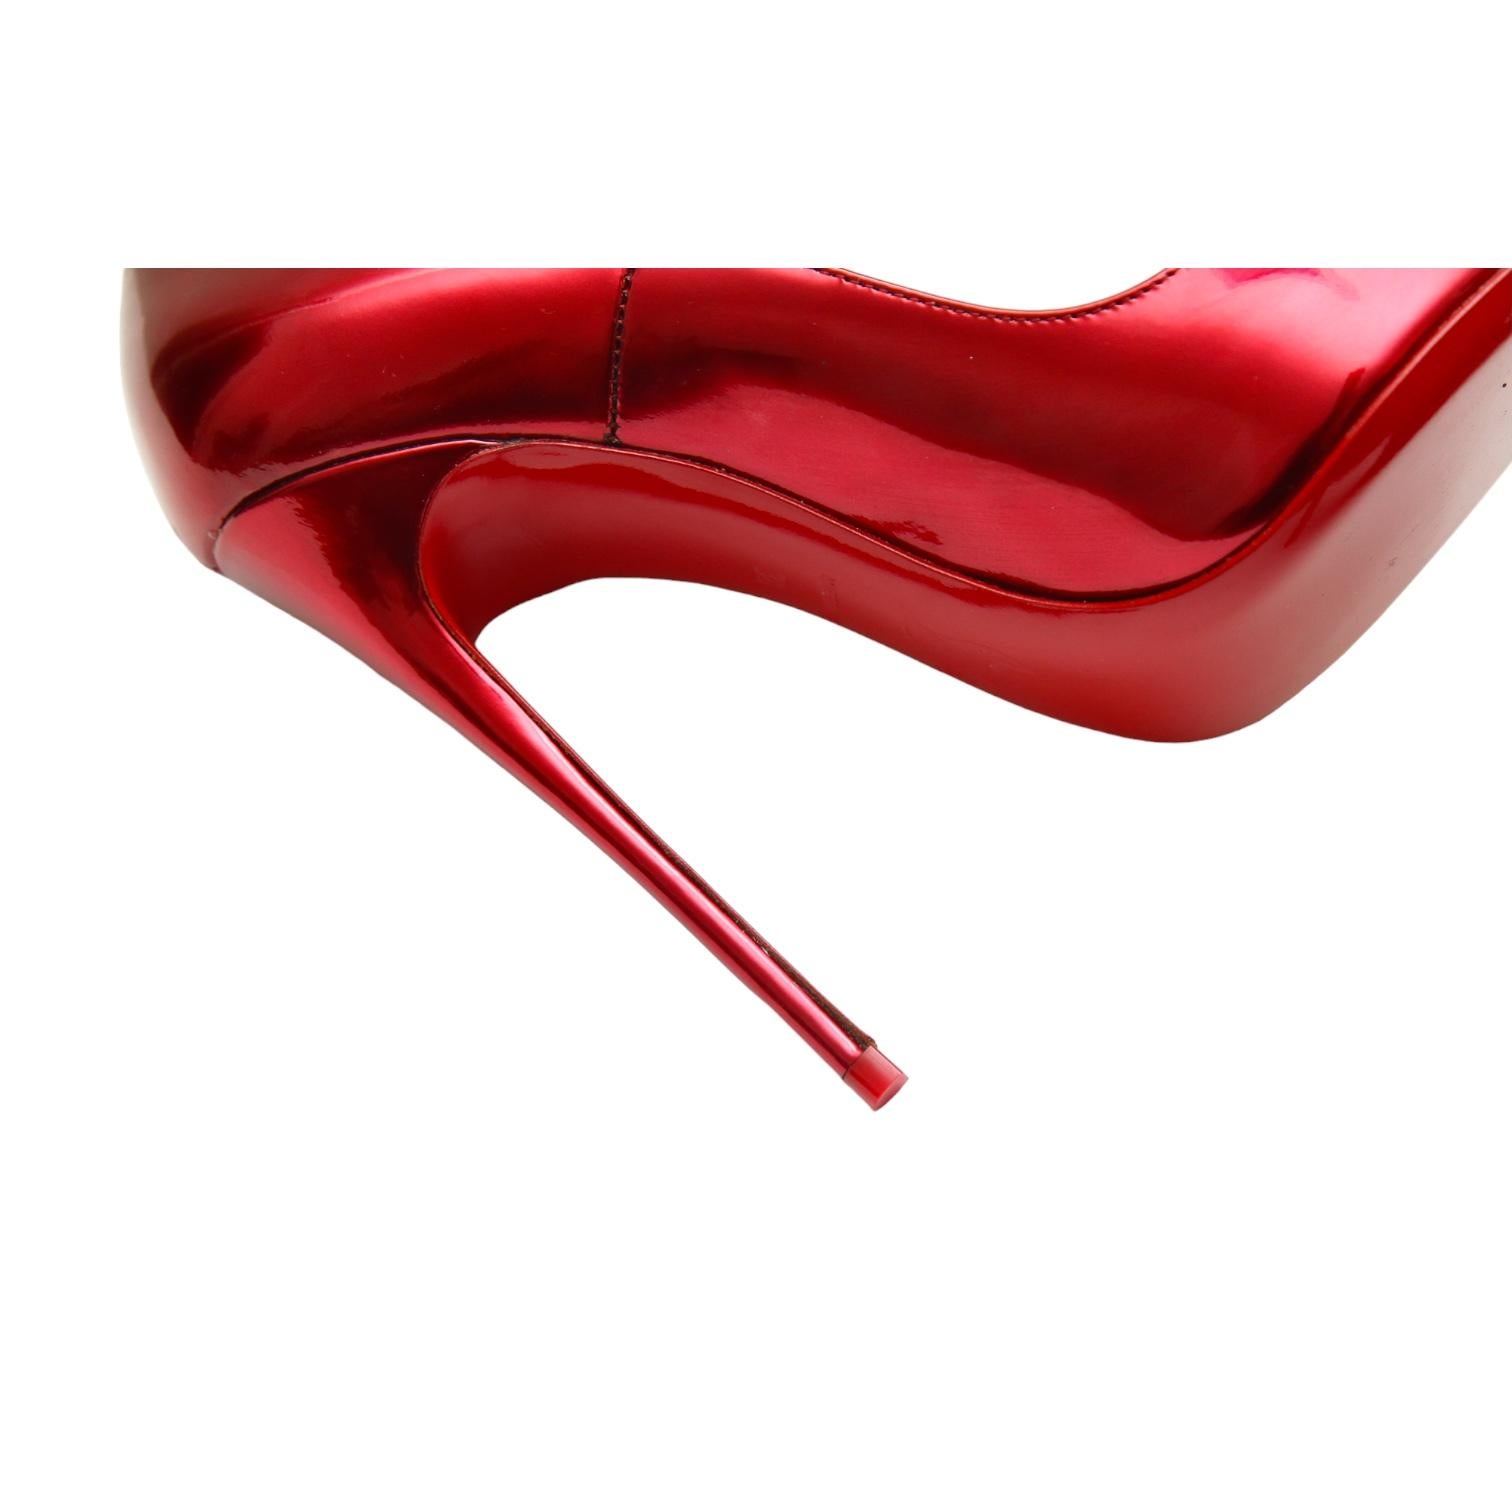 CHRISTIAN LOUBOUTIN So Kate 120 Red Patent Leather Pump Pointed Toe 38 7